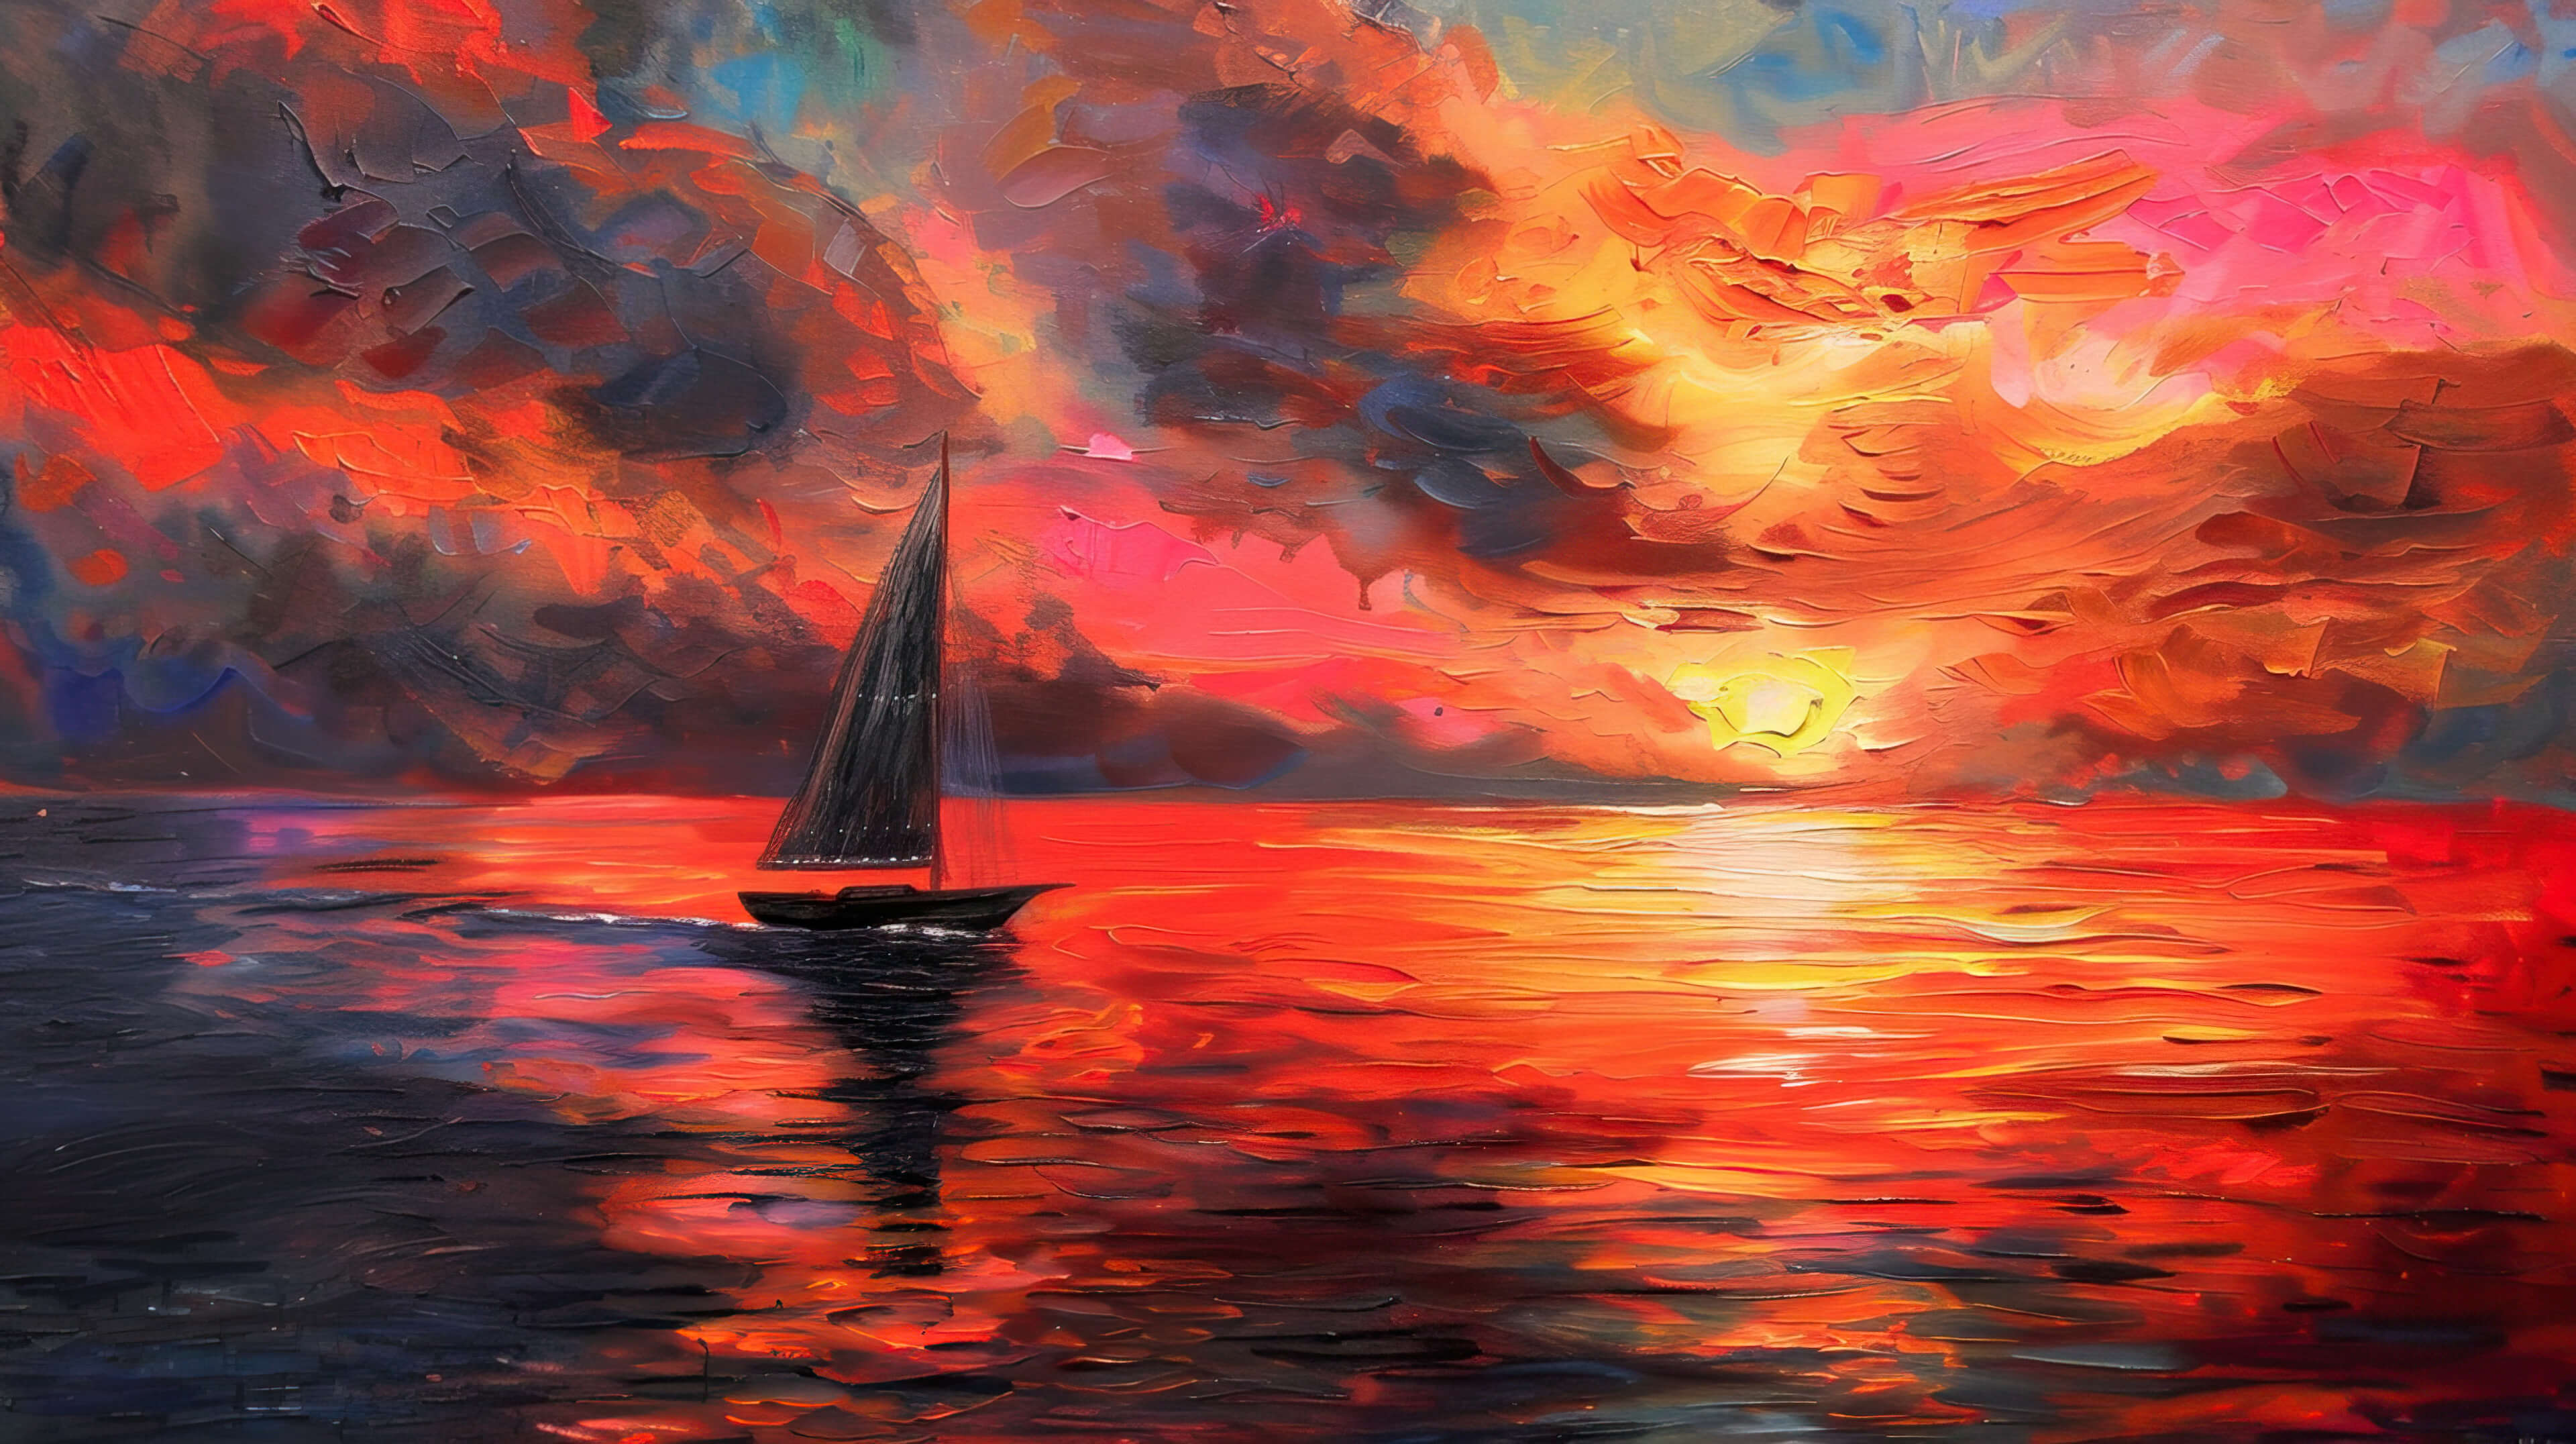 A sailboat silhouette contrasts against a stunning sunset reflection on water in the wallpaper named Fiery Ocean Sunset